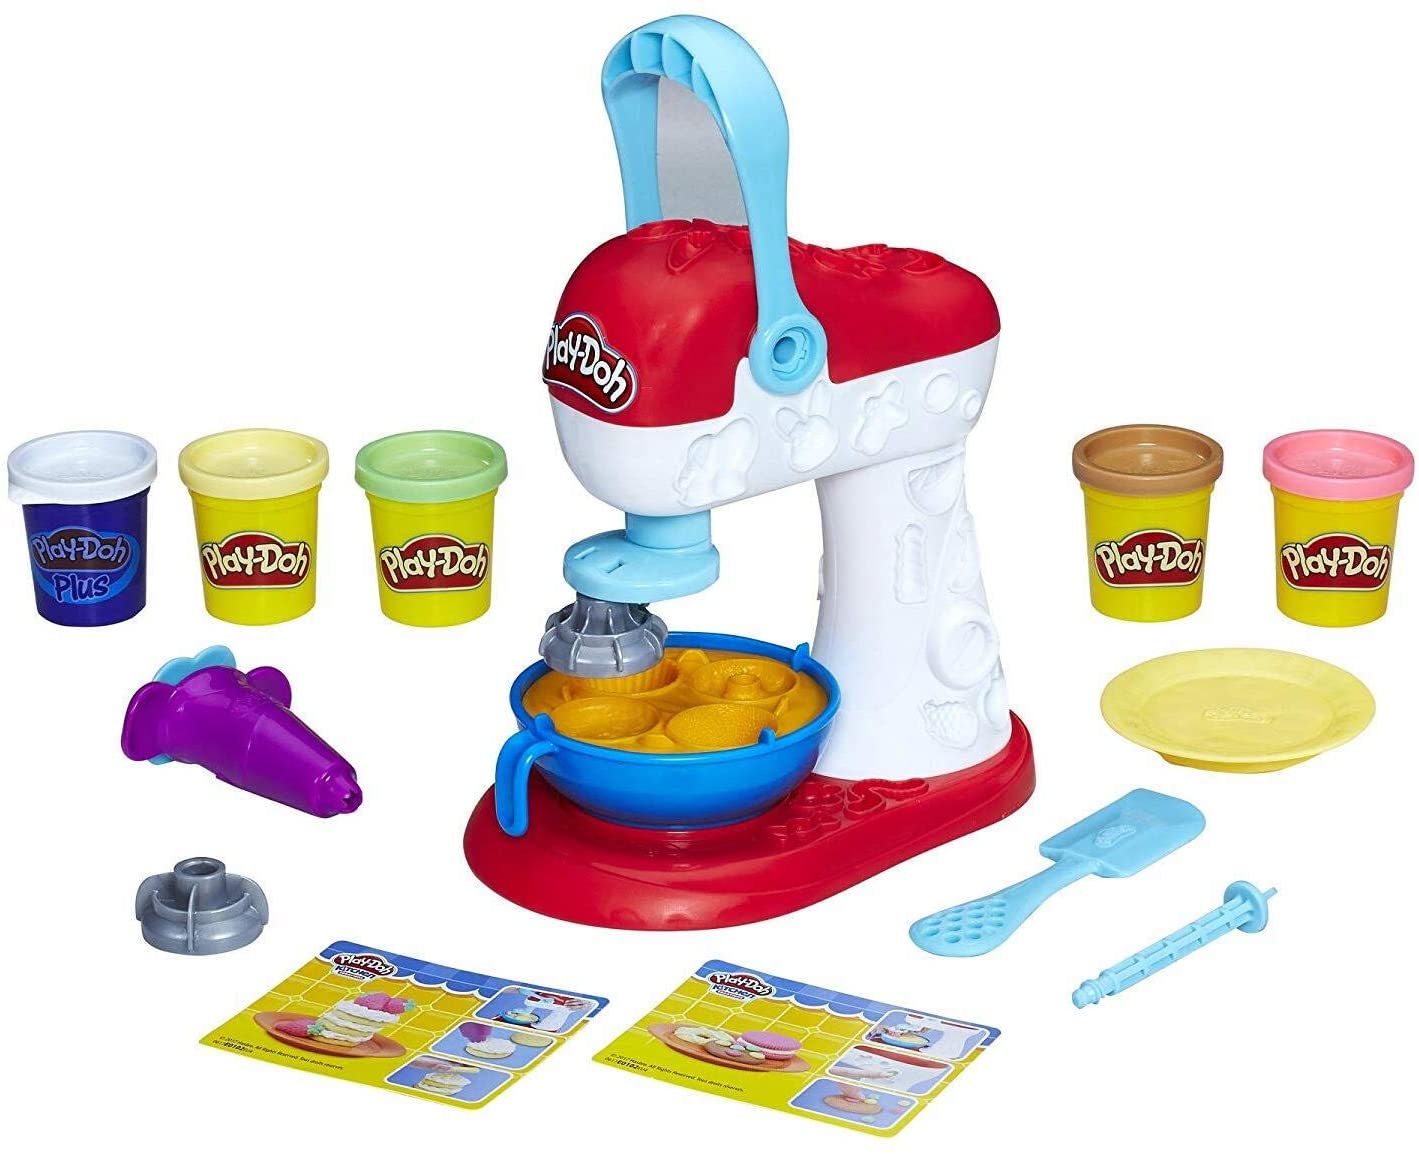 13-Piece Play-Doh Kitchen Creations Spinning Treats Mixer Food Set $8.18 + Free Shipping w/ Prime or on $25+